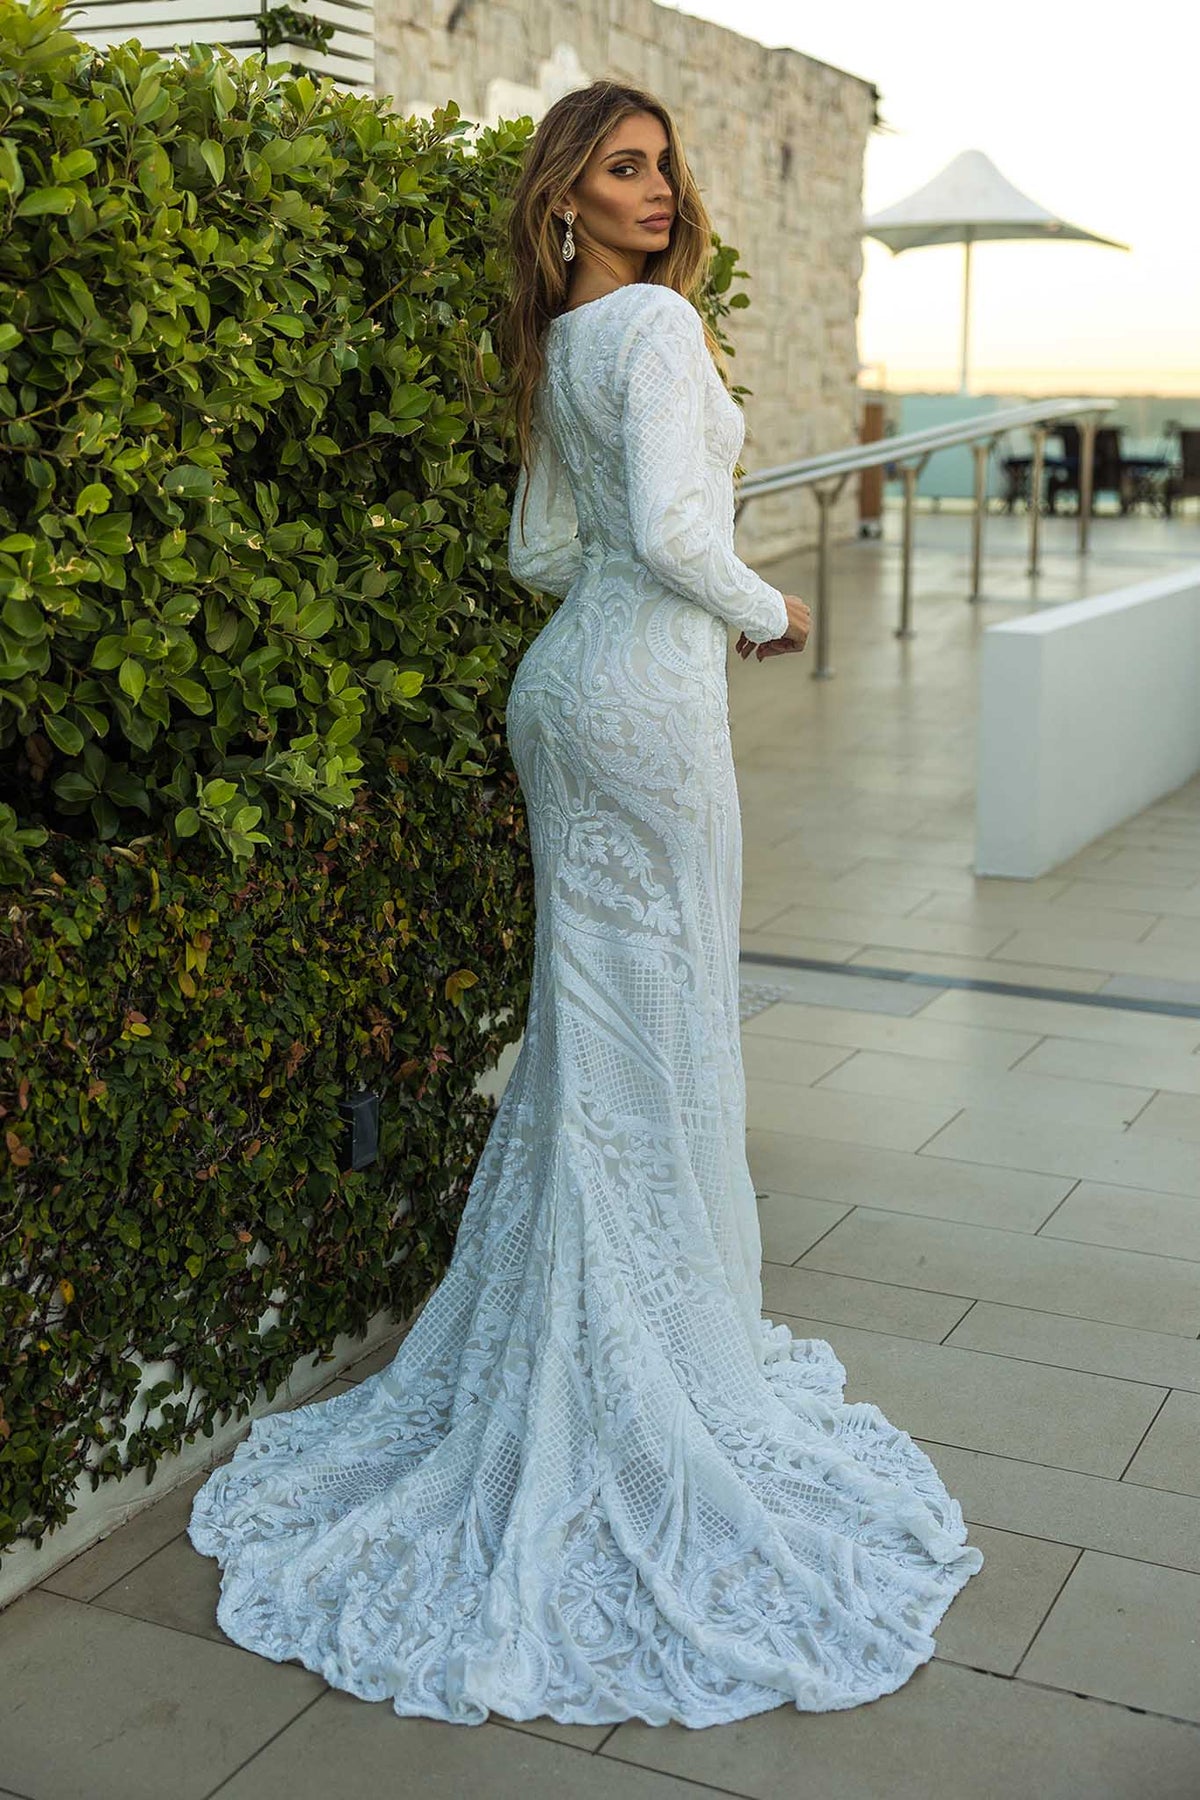 White Embroidered Pattern Sequin Fitted Full Length Evening Bridal Gown, Long Sleeves, Deep V Neck, Long Mermaid Train